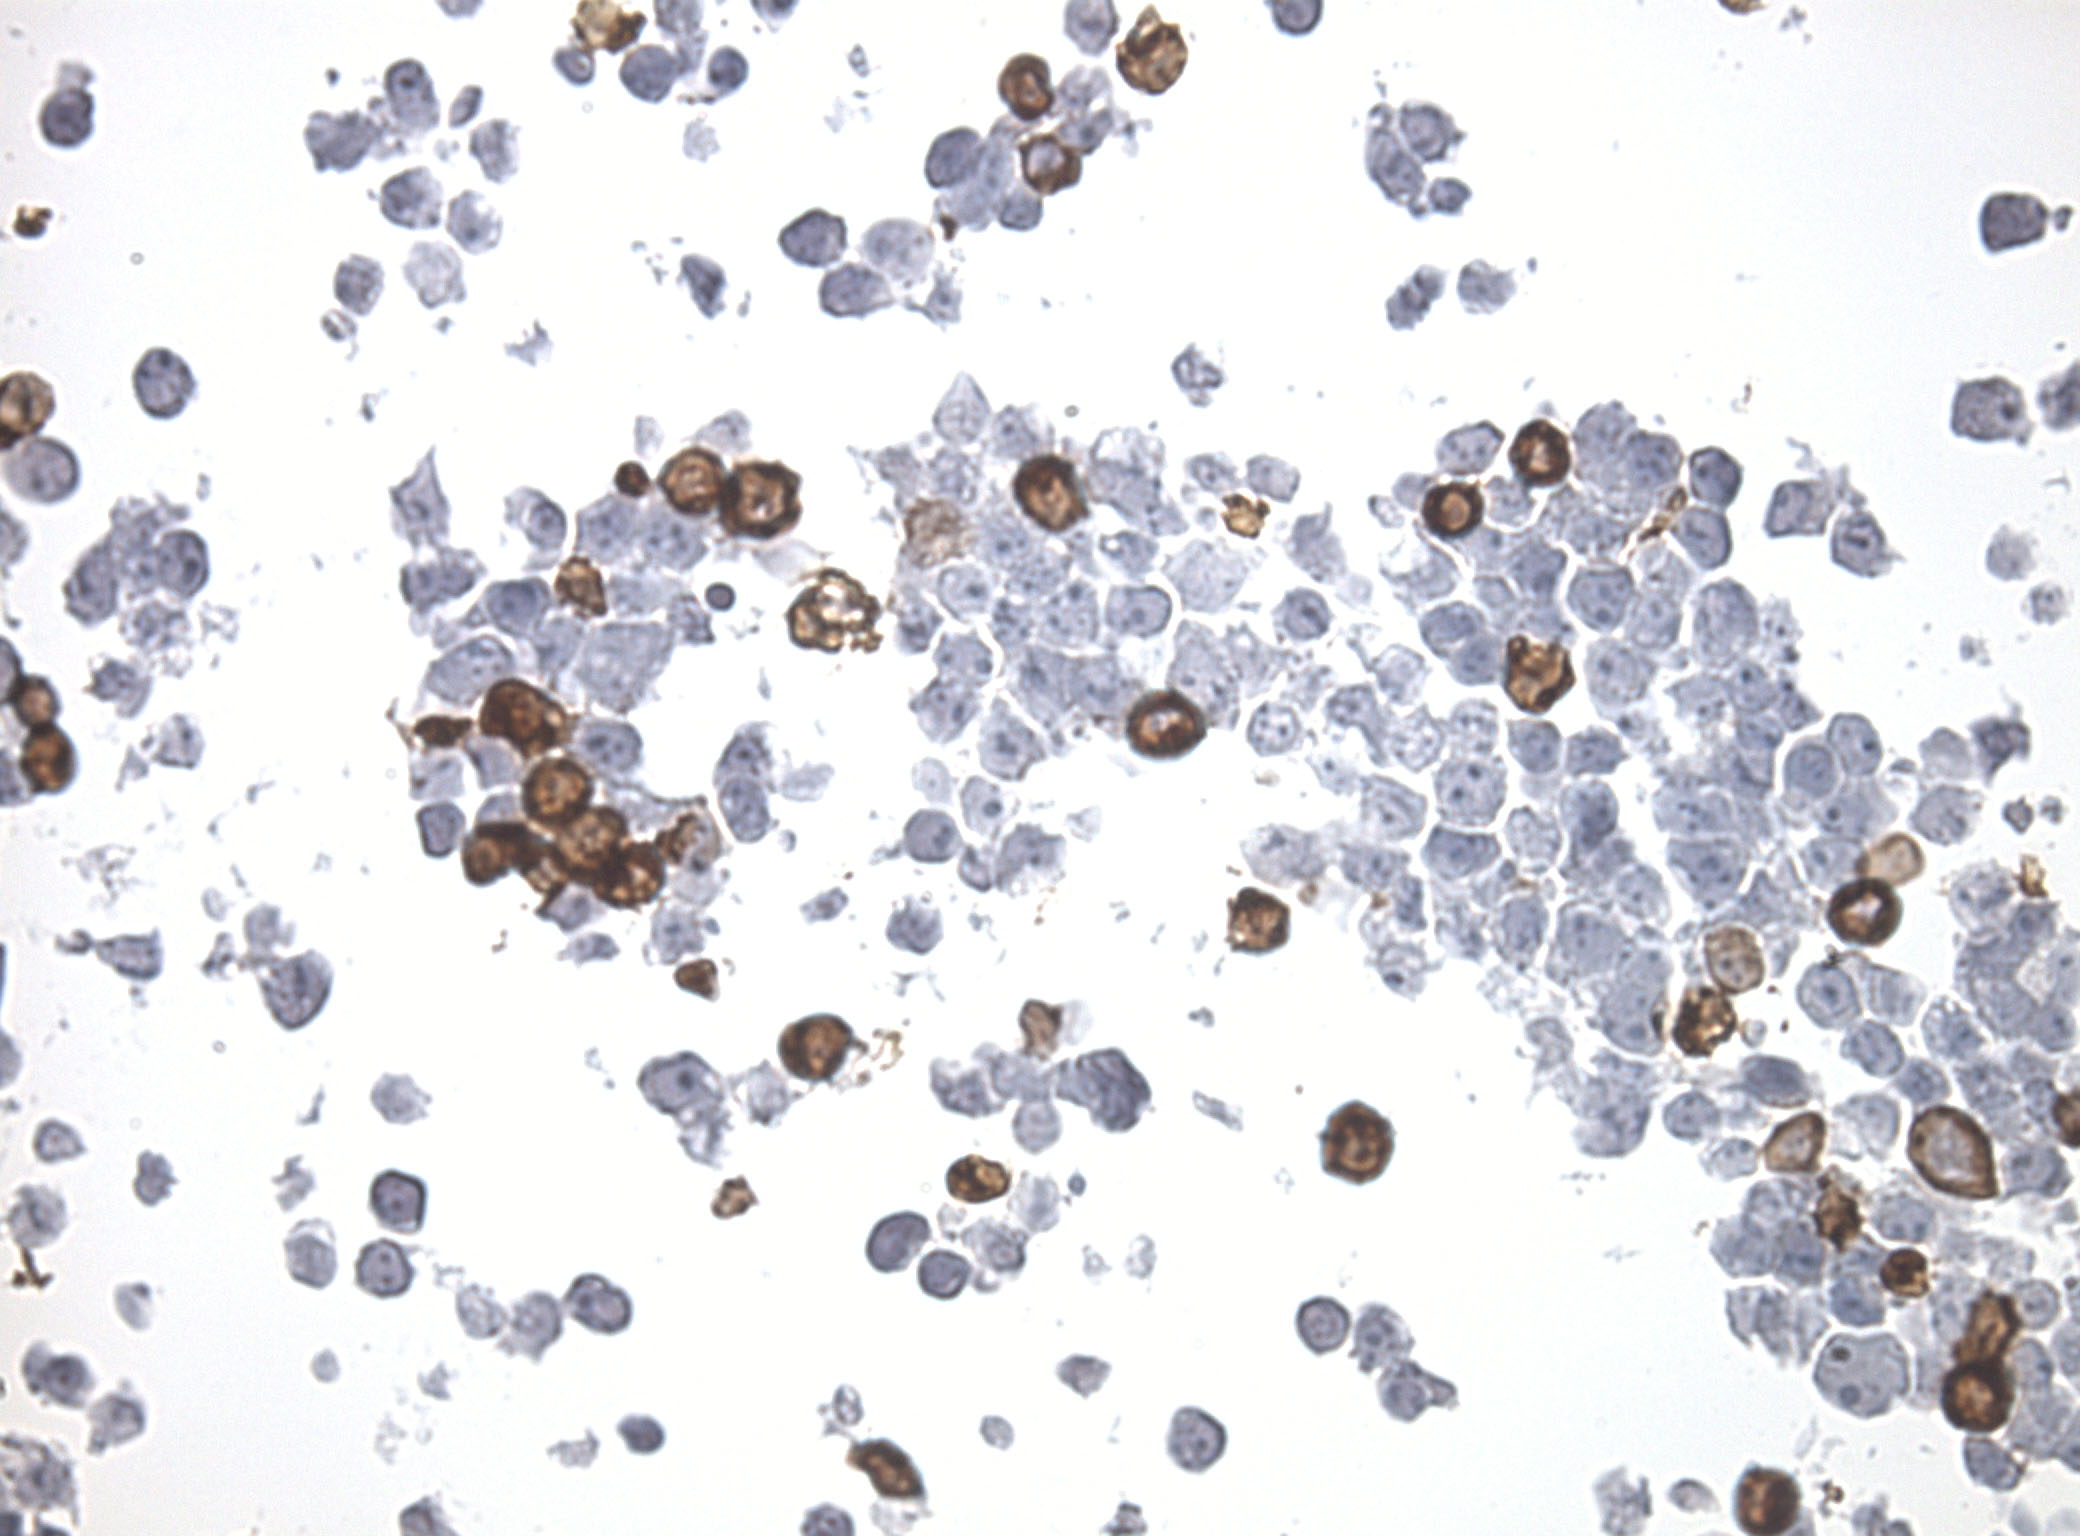 Immunohistology staining on SNRNP40 overexpressed cytosection TS400548P5 with mouse anti DDK clone OTI11C3 C/N TA180144 at 1:400 dilution 4C O/N. Antibody staining was achieved with HIER Citrate pH6 , Polink1 with DAB chromogen detection kit (D11-18). Positive stain shown with the brown chromogen present. HEK293T cells were transfected with cDNA clone RC200548, 5 micron sections, 40x magnification